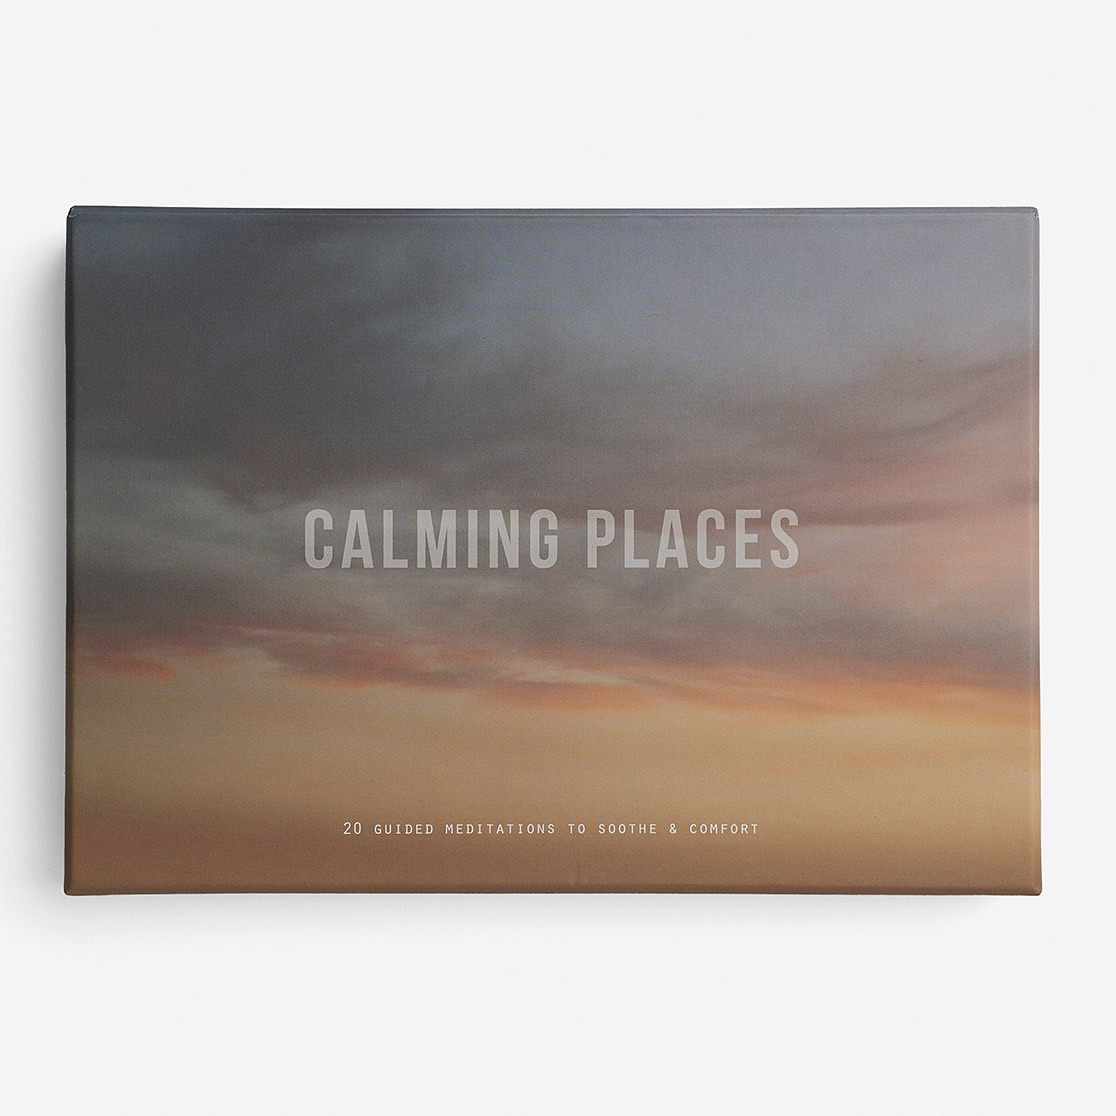 CALMING PLACES | 20 MEDITATIONS-KARTEN | English Edition | The School of Life - Charles & Marie